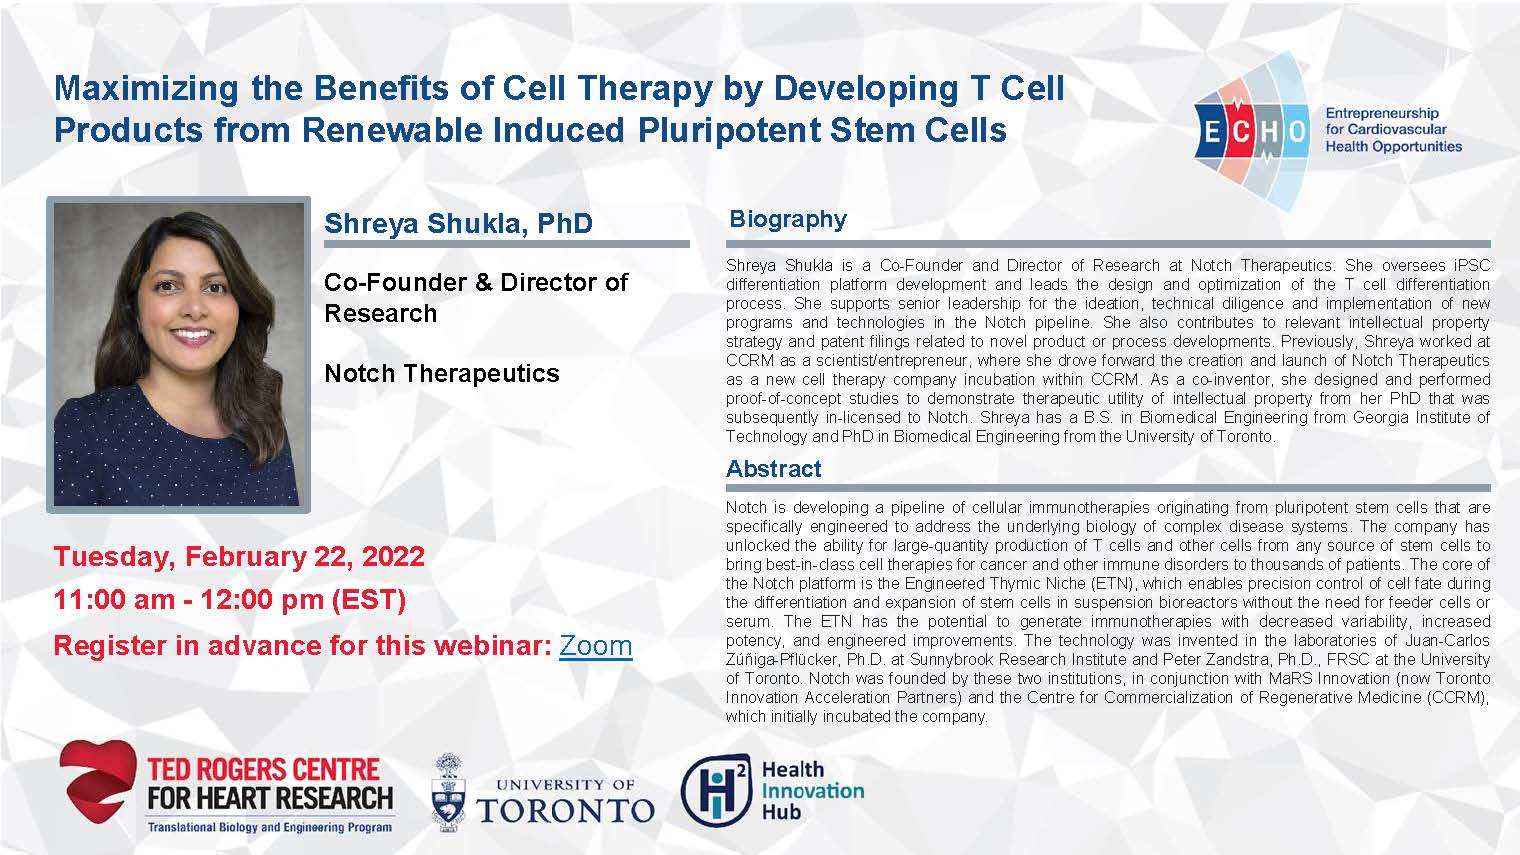  ECHO Webinar: Maximizing the Benefits of Cell Therapy by Developing T Cell Products from Renewable Induced Pluripotent Stem Cells